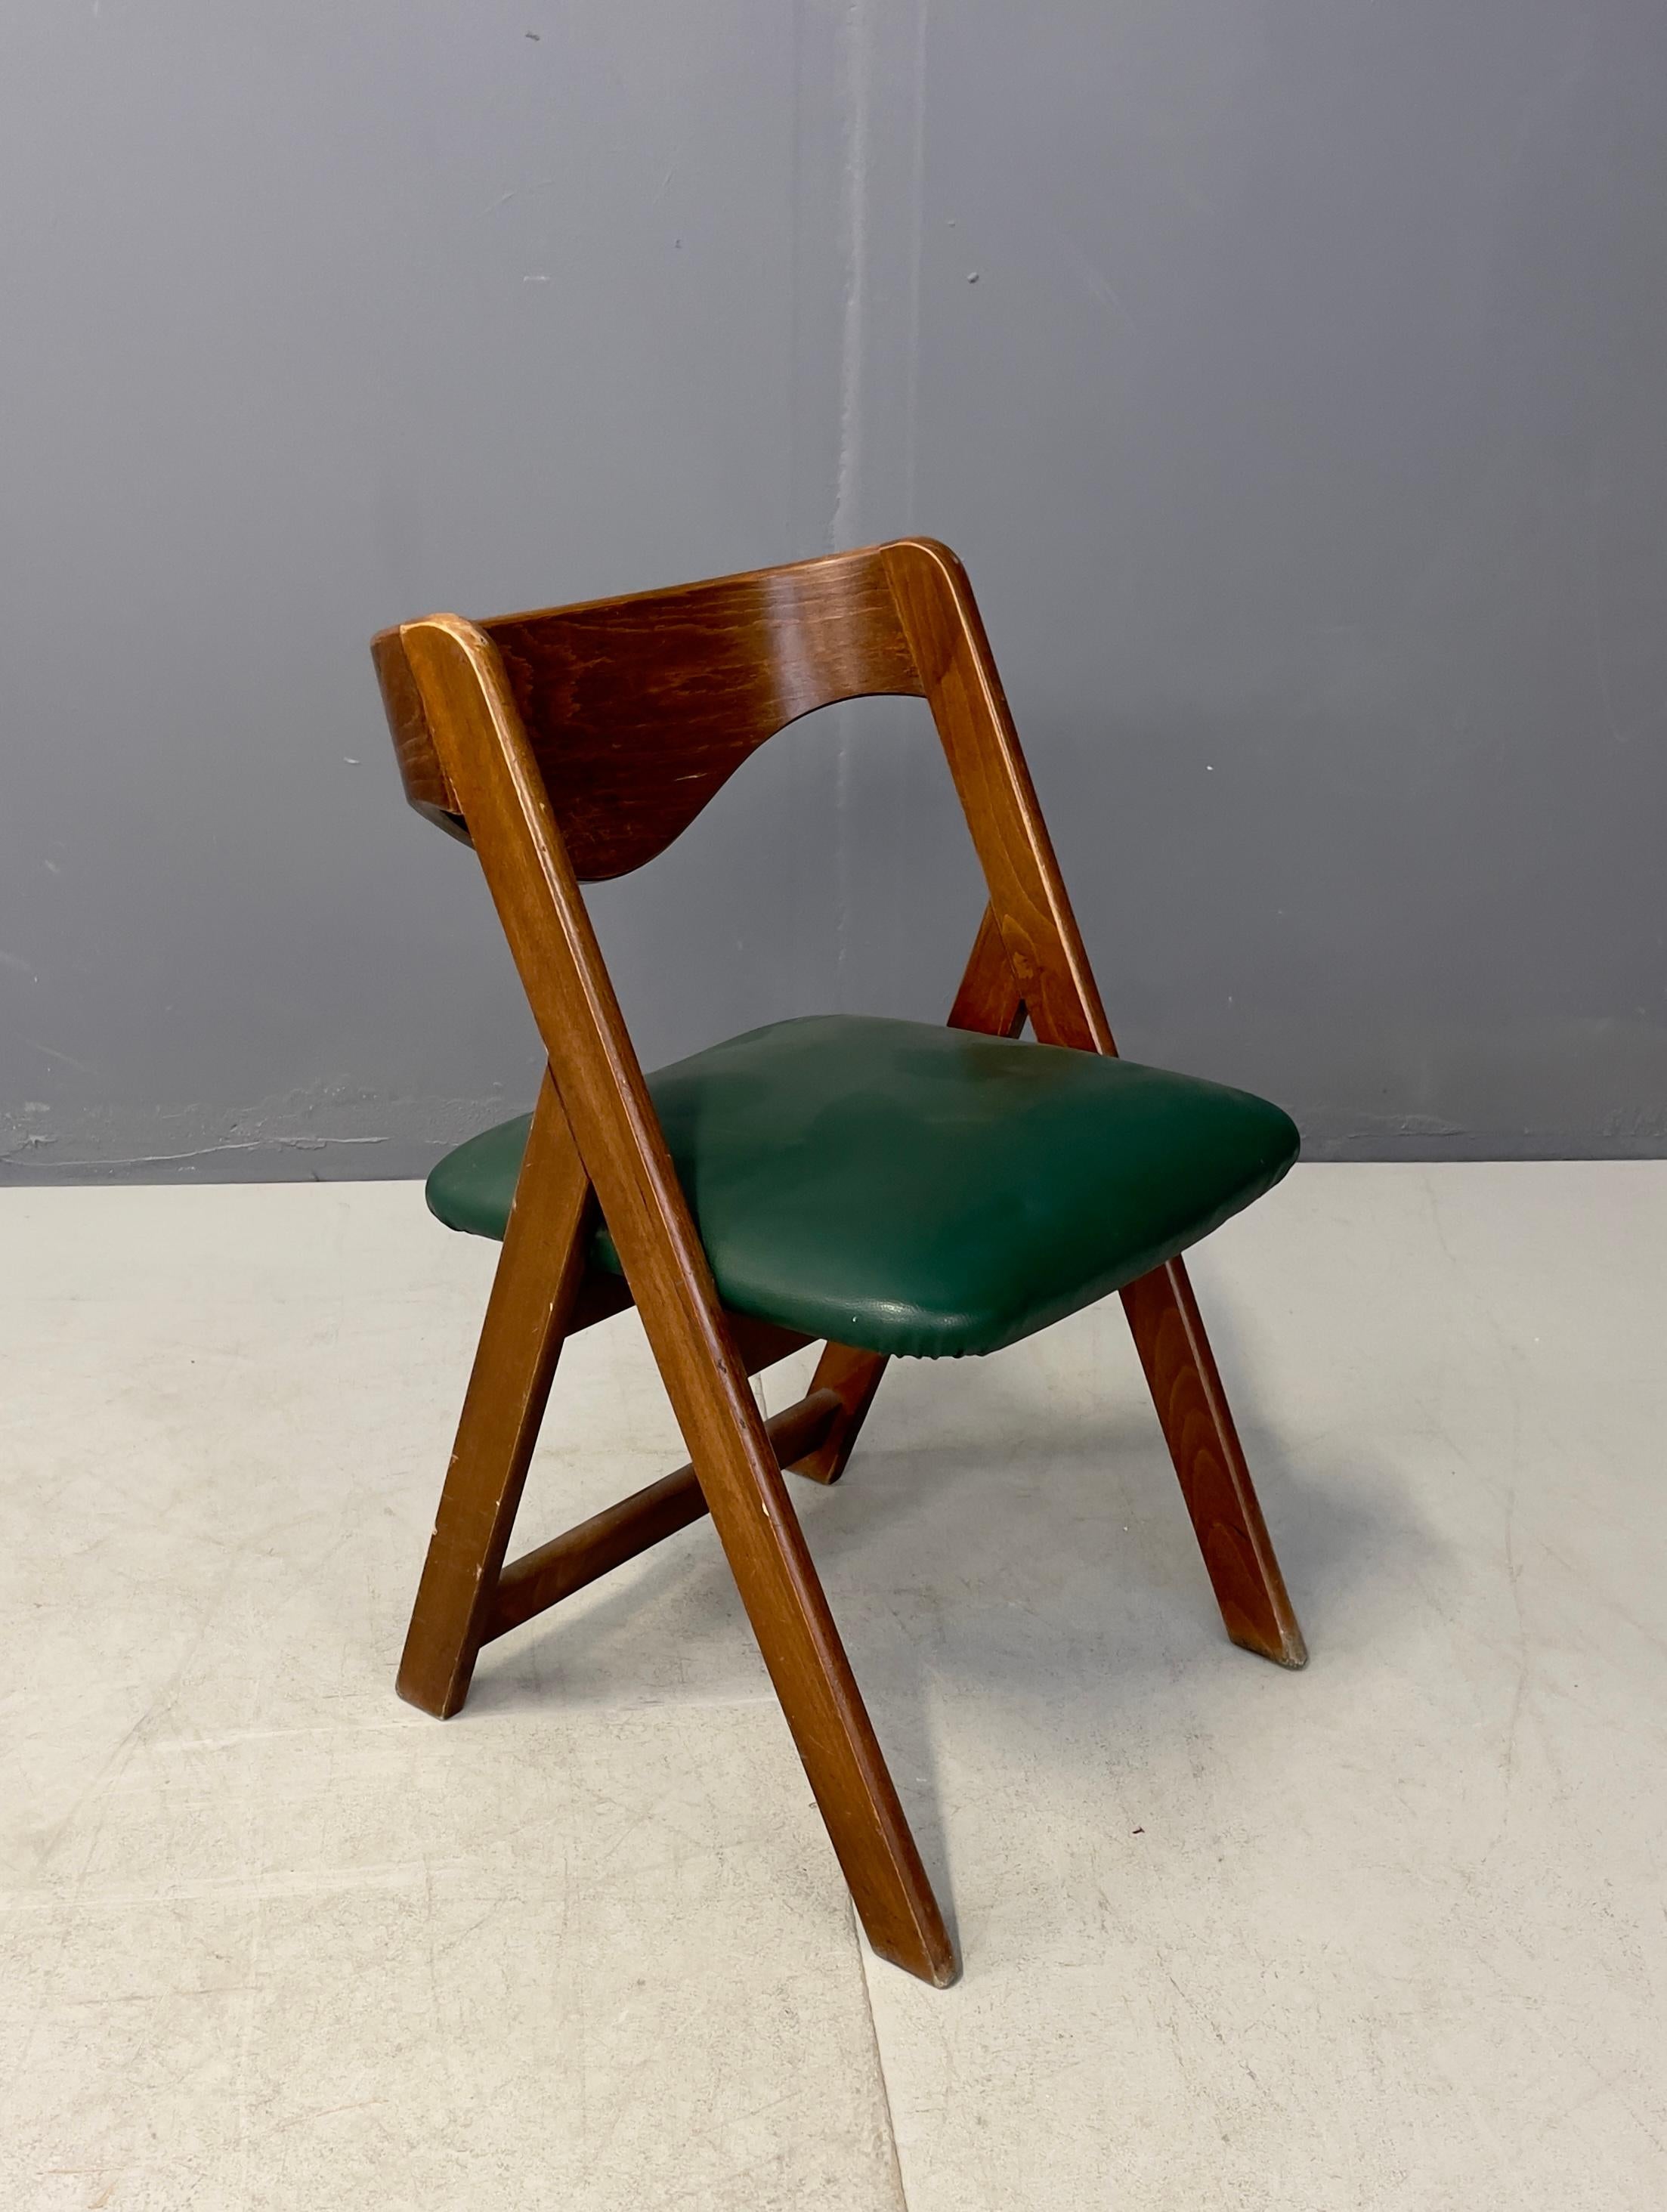 Three wooden chairs with green leather seats. 1960s.
Beautiful living room chairs in good condition.